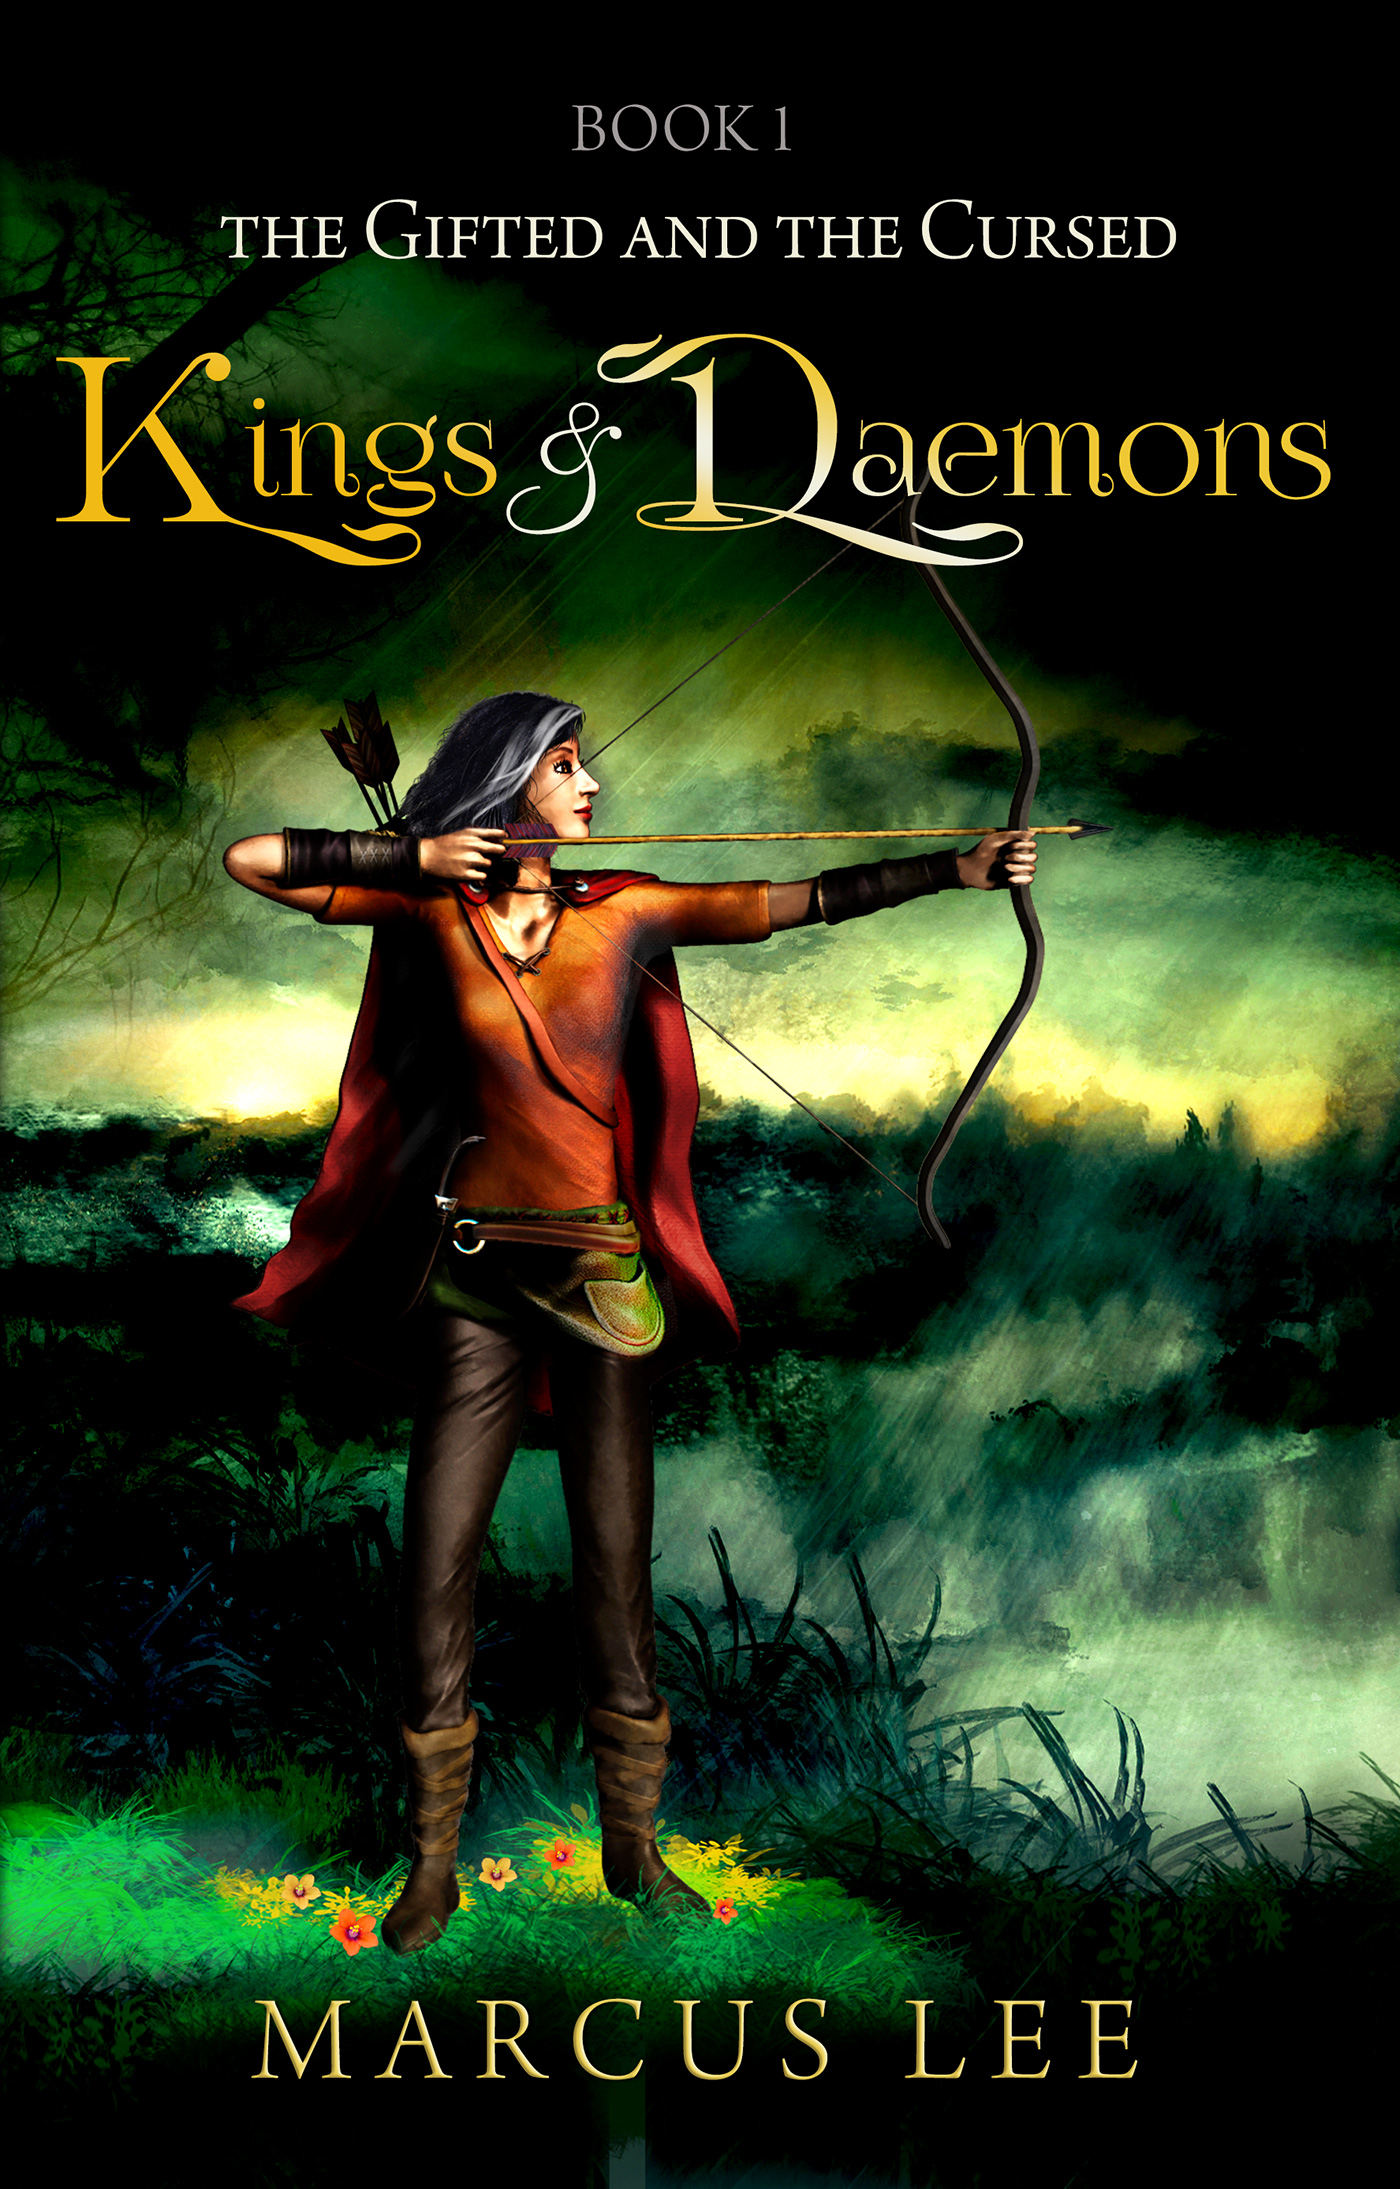 FREE: Kings and Daemons by Marcus Lee